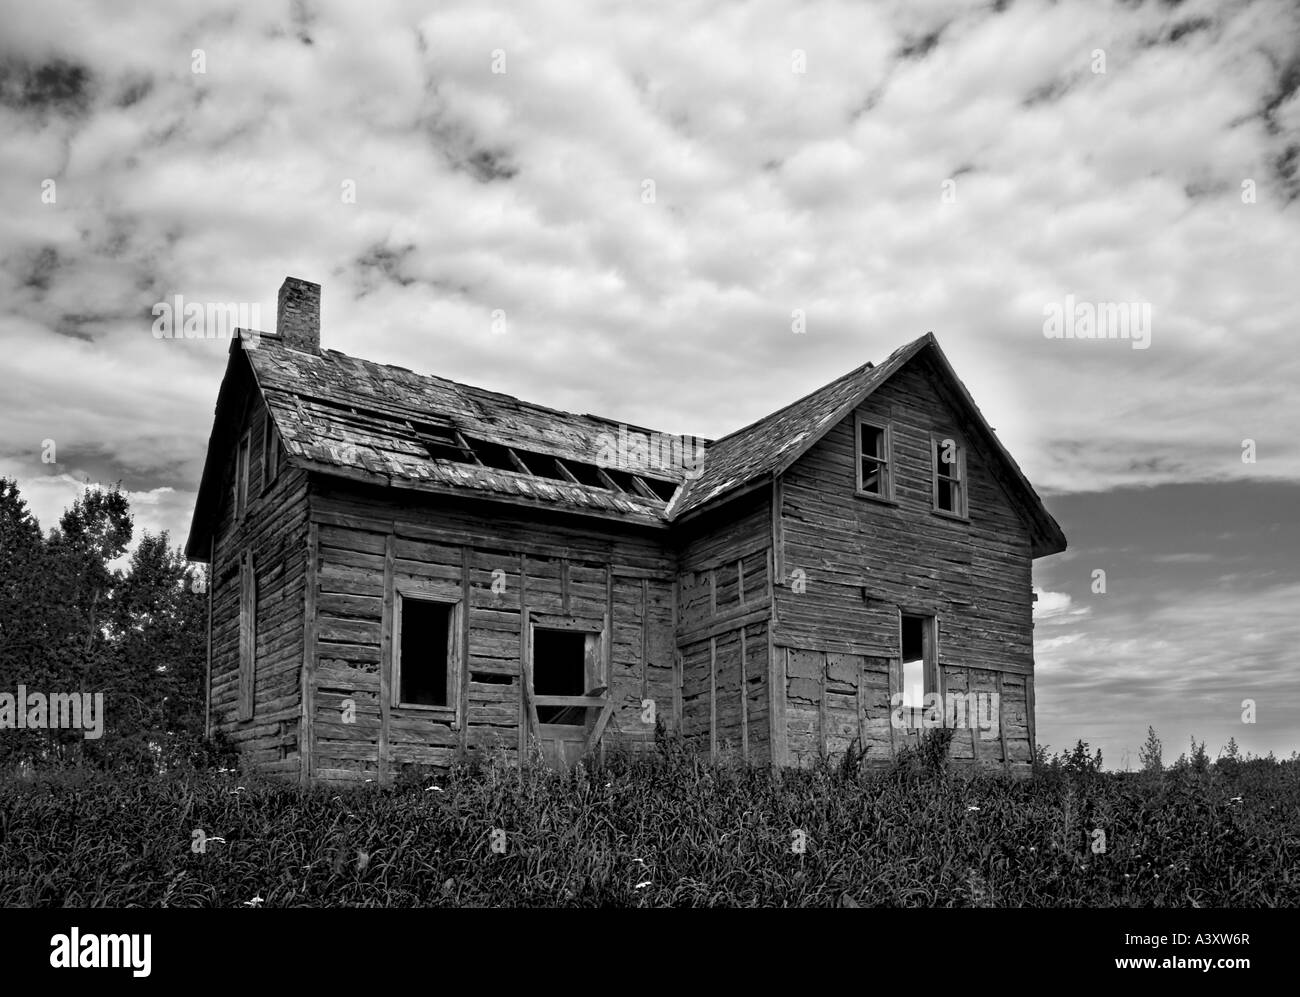 wooden house falling into ruin Stock Photo